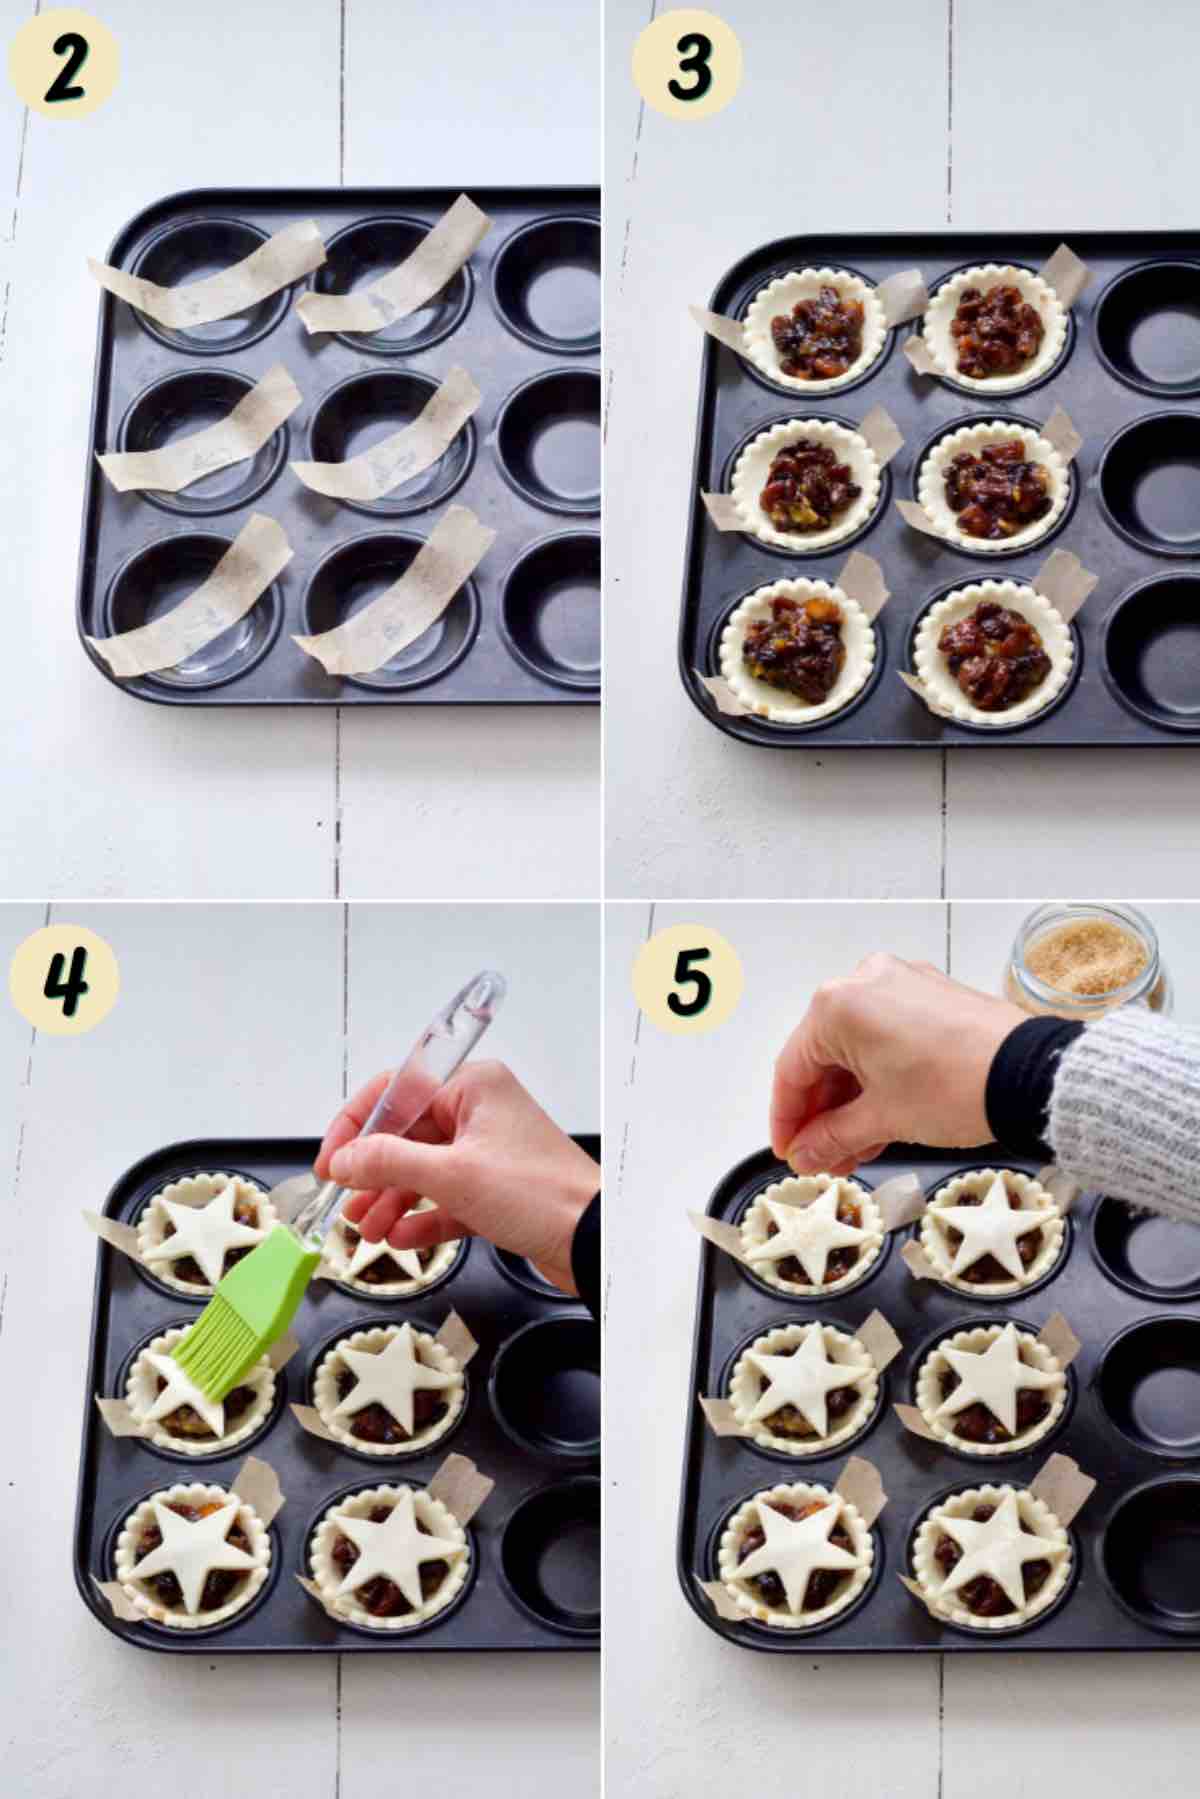 Process of making puff pastry mince pies in the oven.